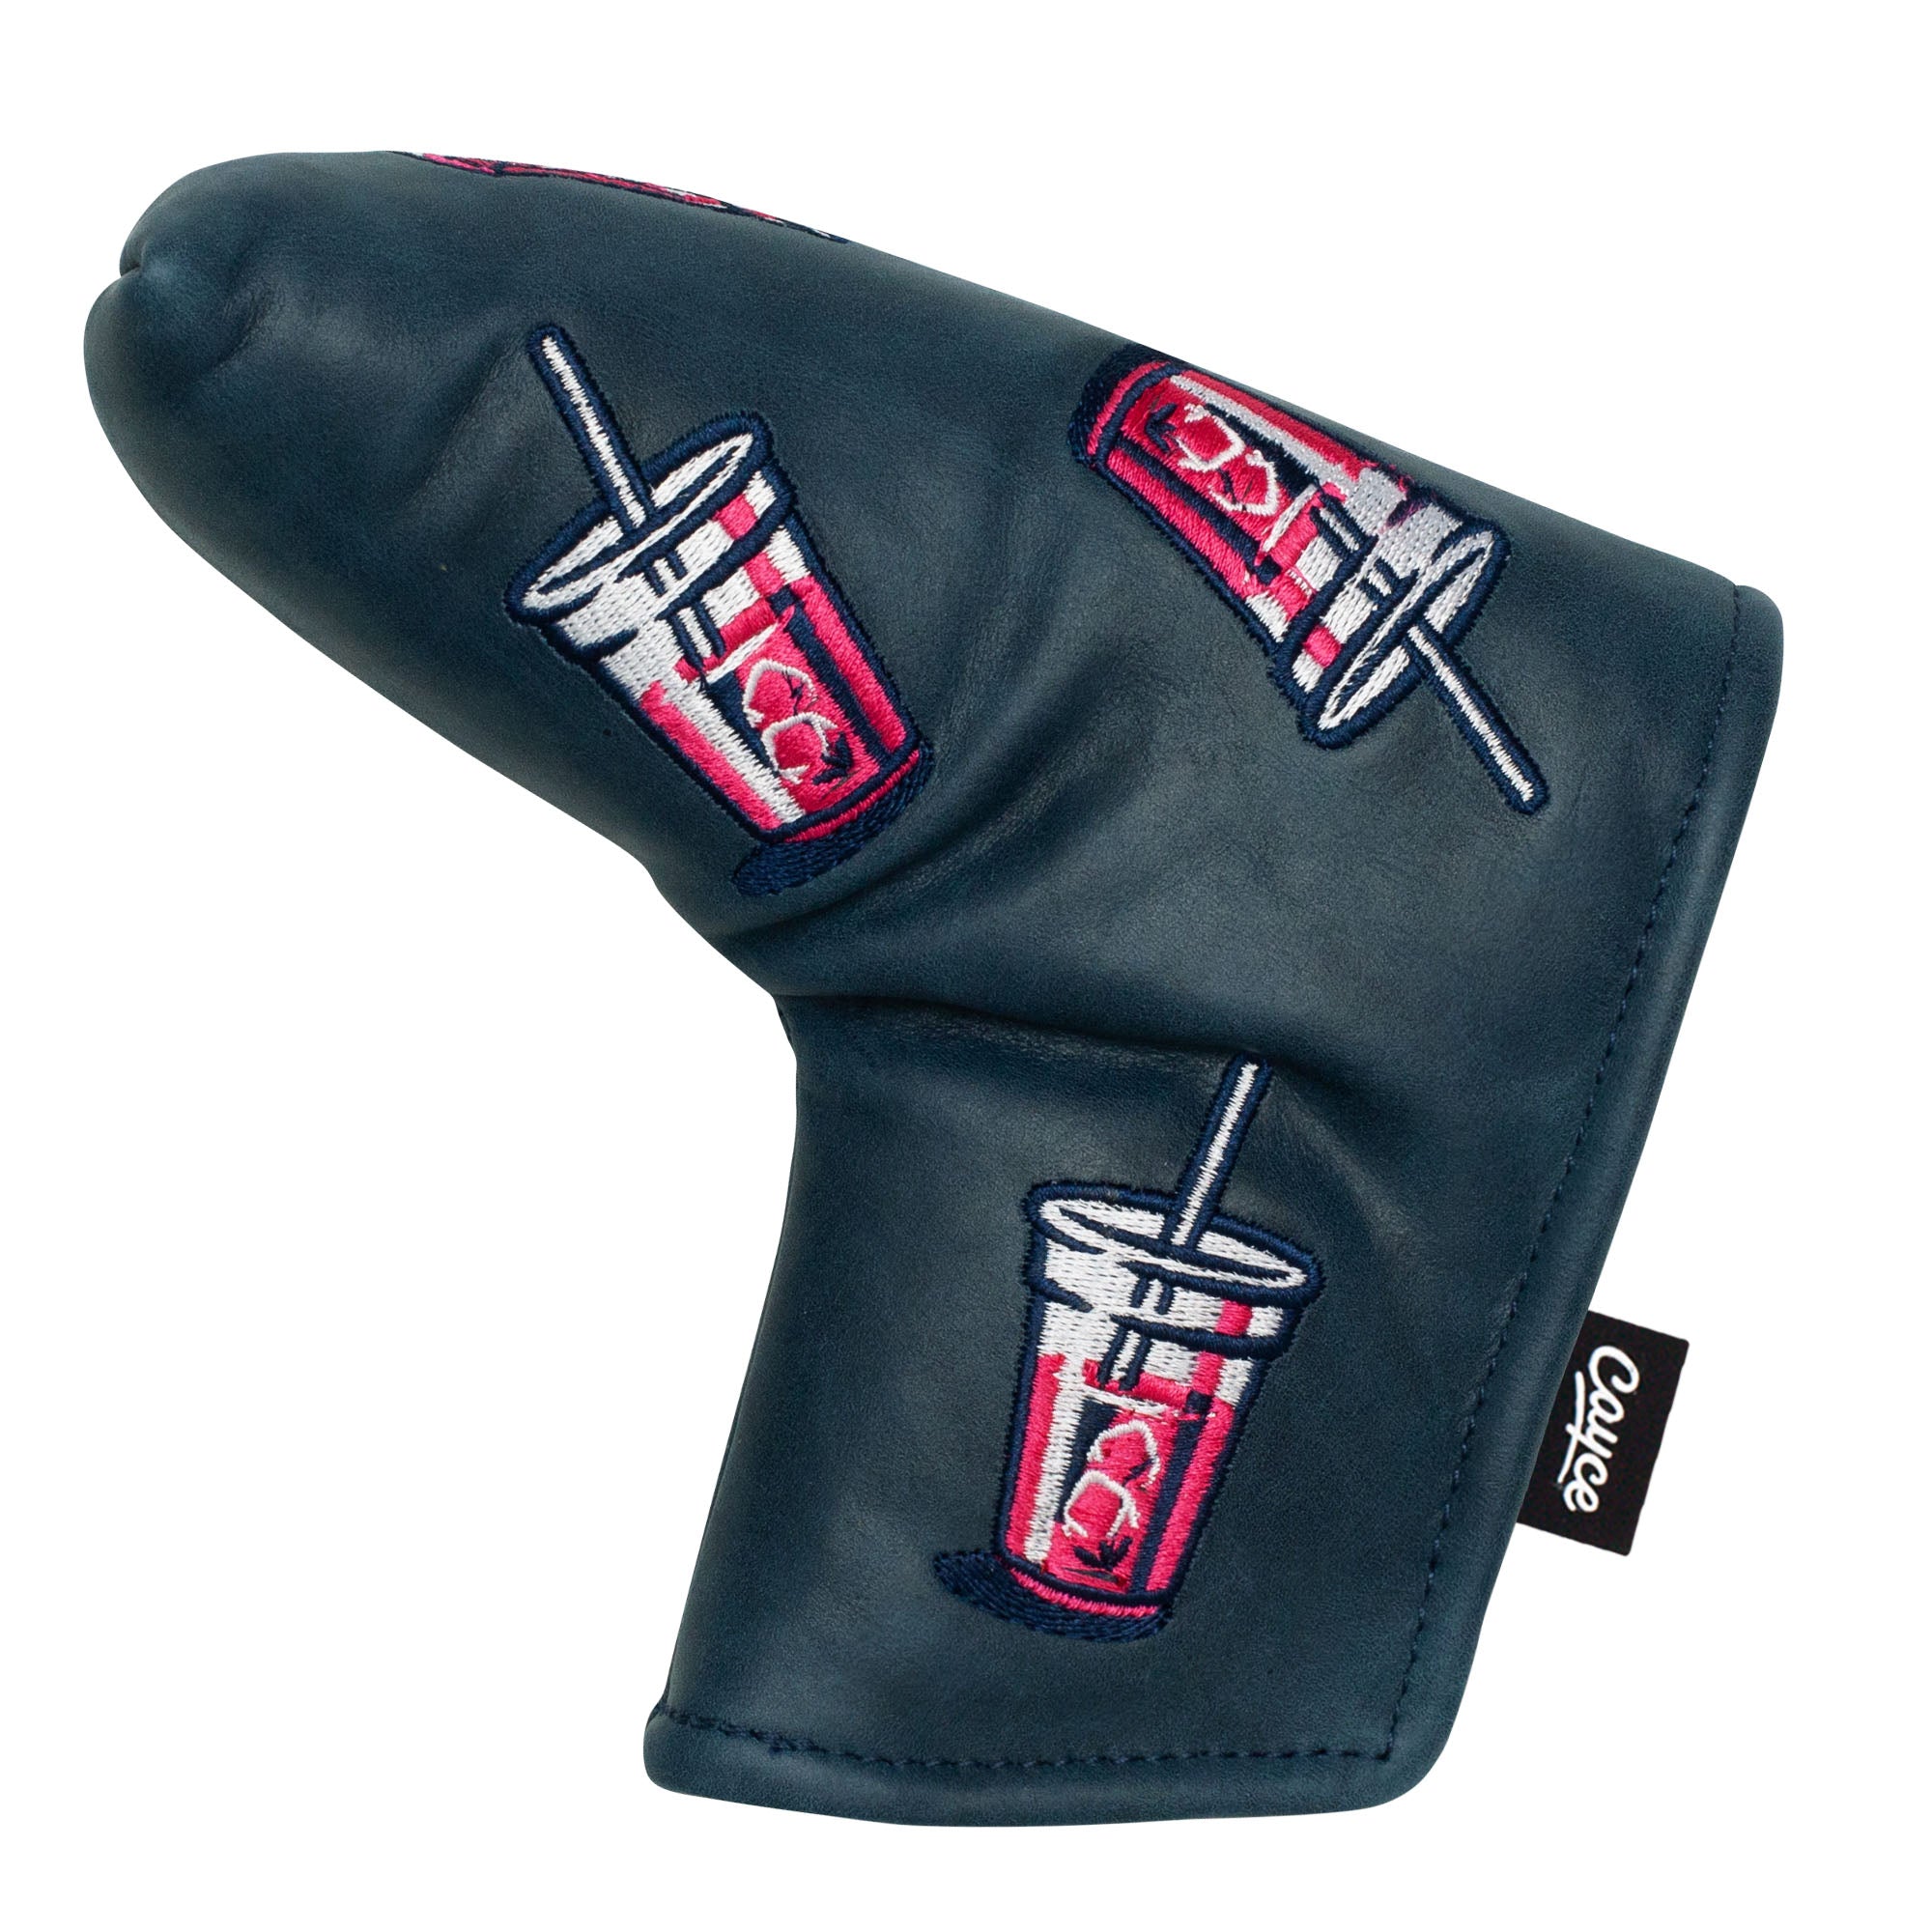 Transfusion Leather Putter Cover